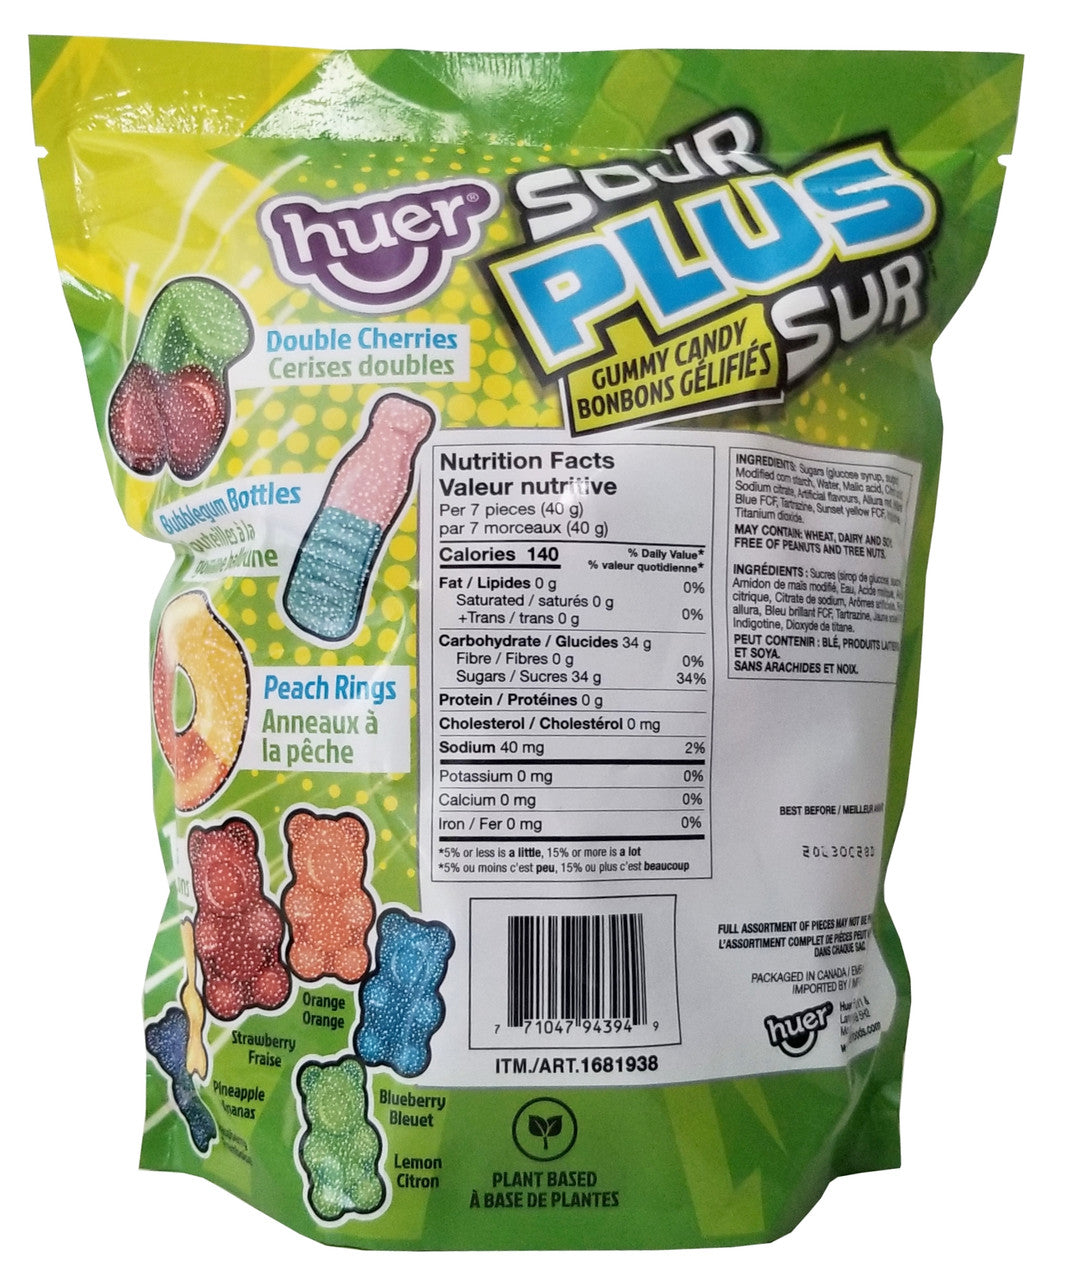 Huer Sour PLUS Gummy Candy, 1.2 kg/2.6 lbs., Bag {Imported from Canada}